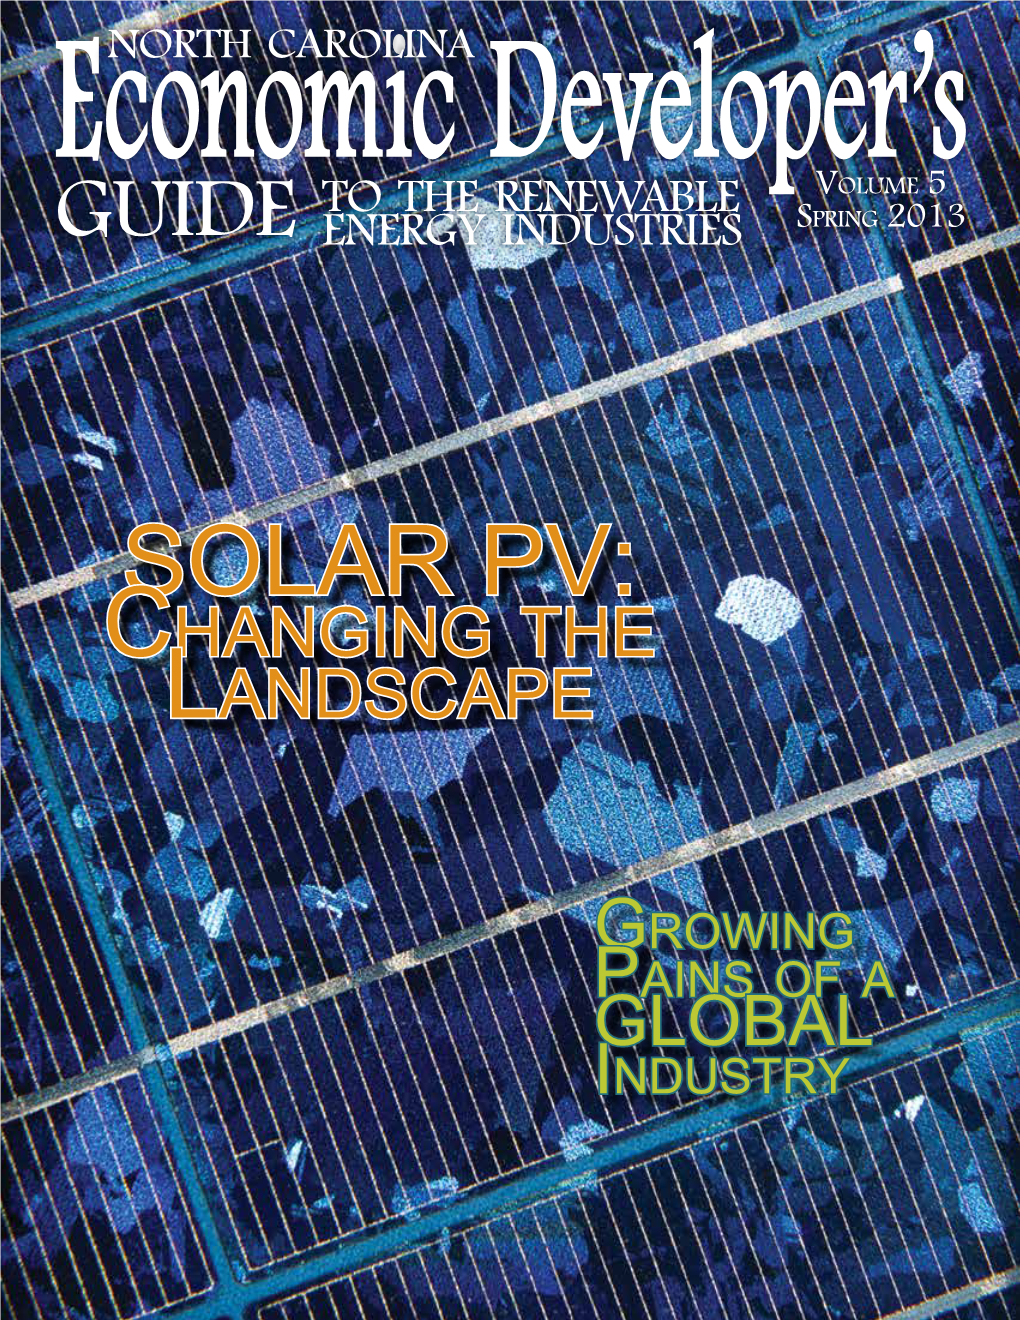 SOLAR PV: Changing the Landscape